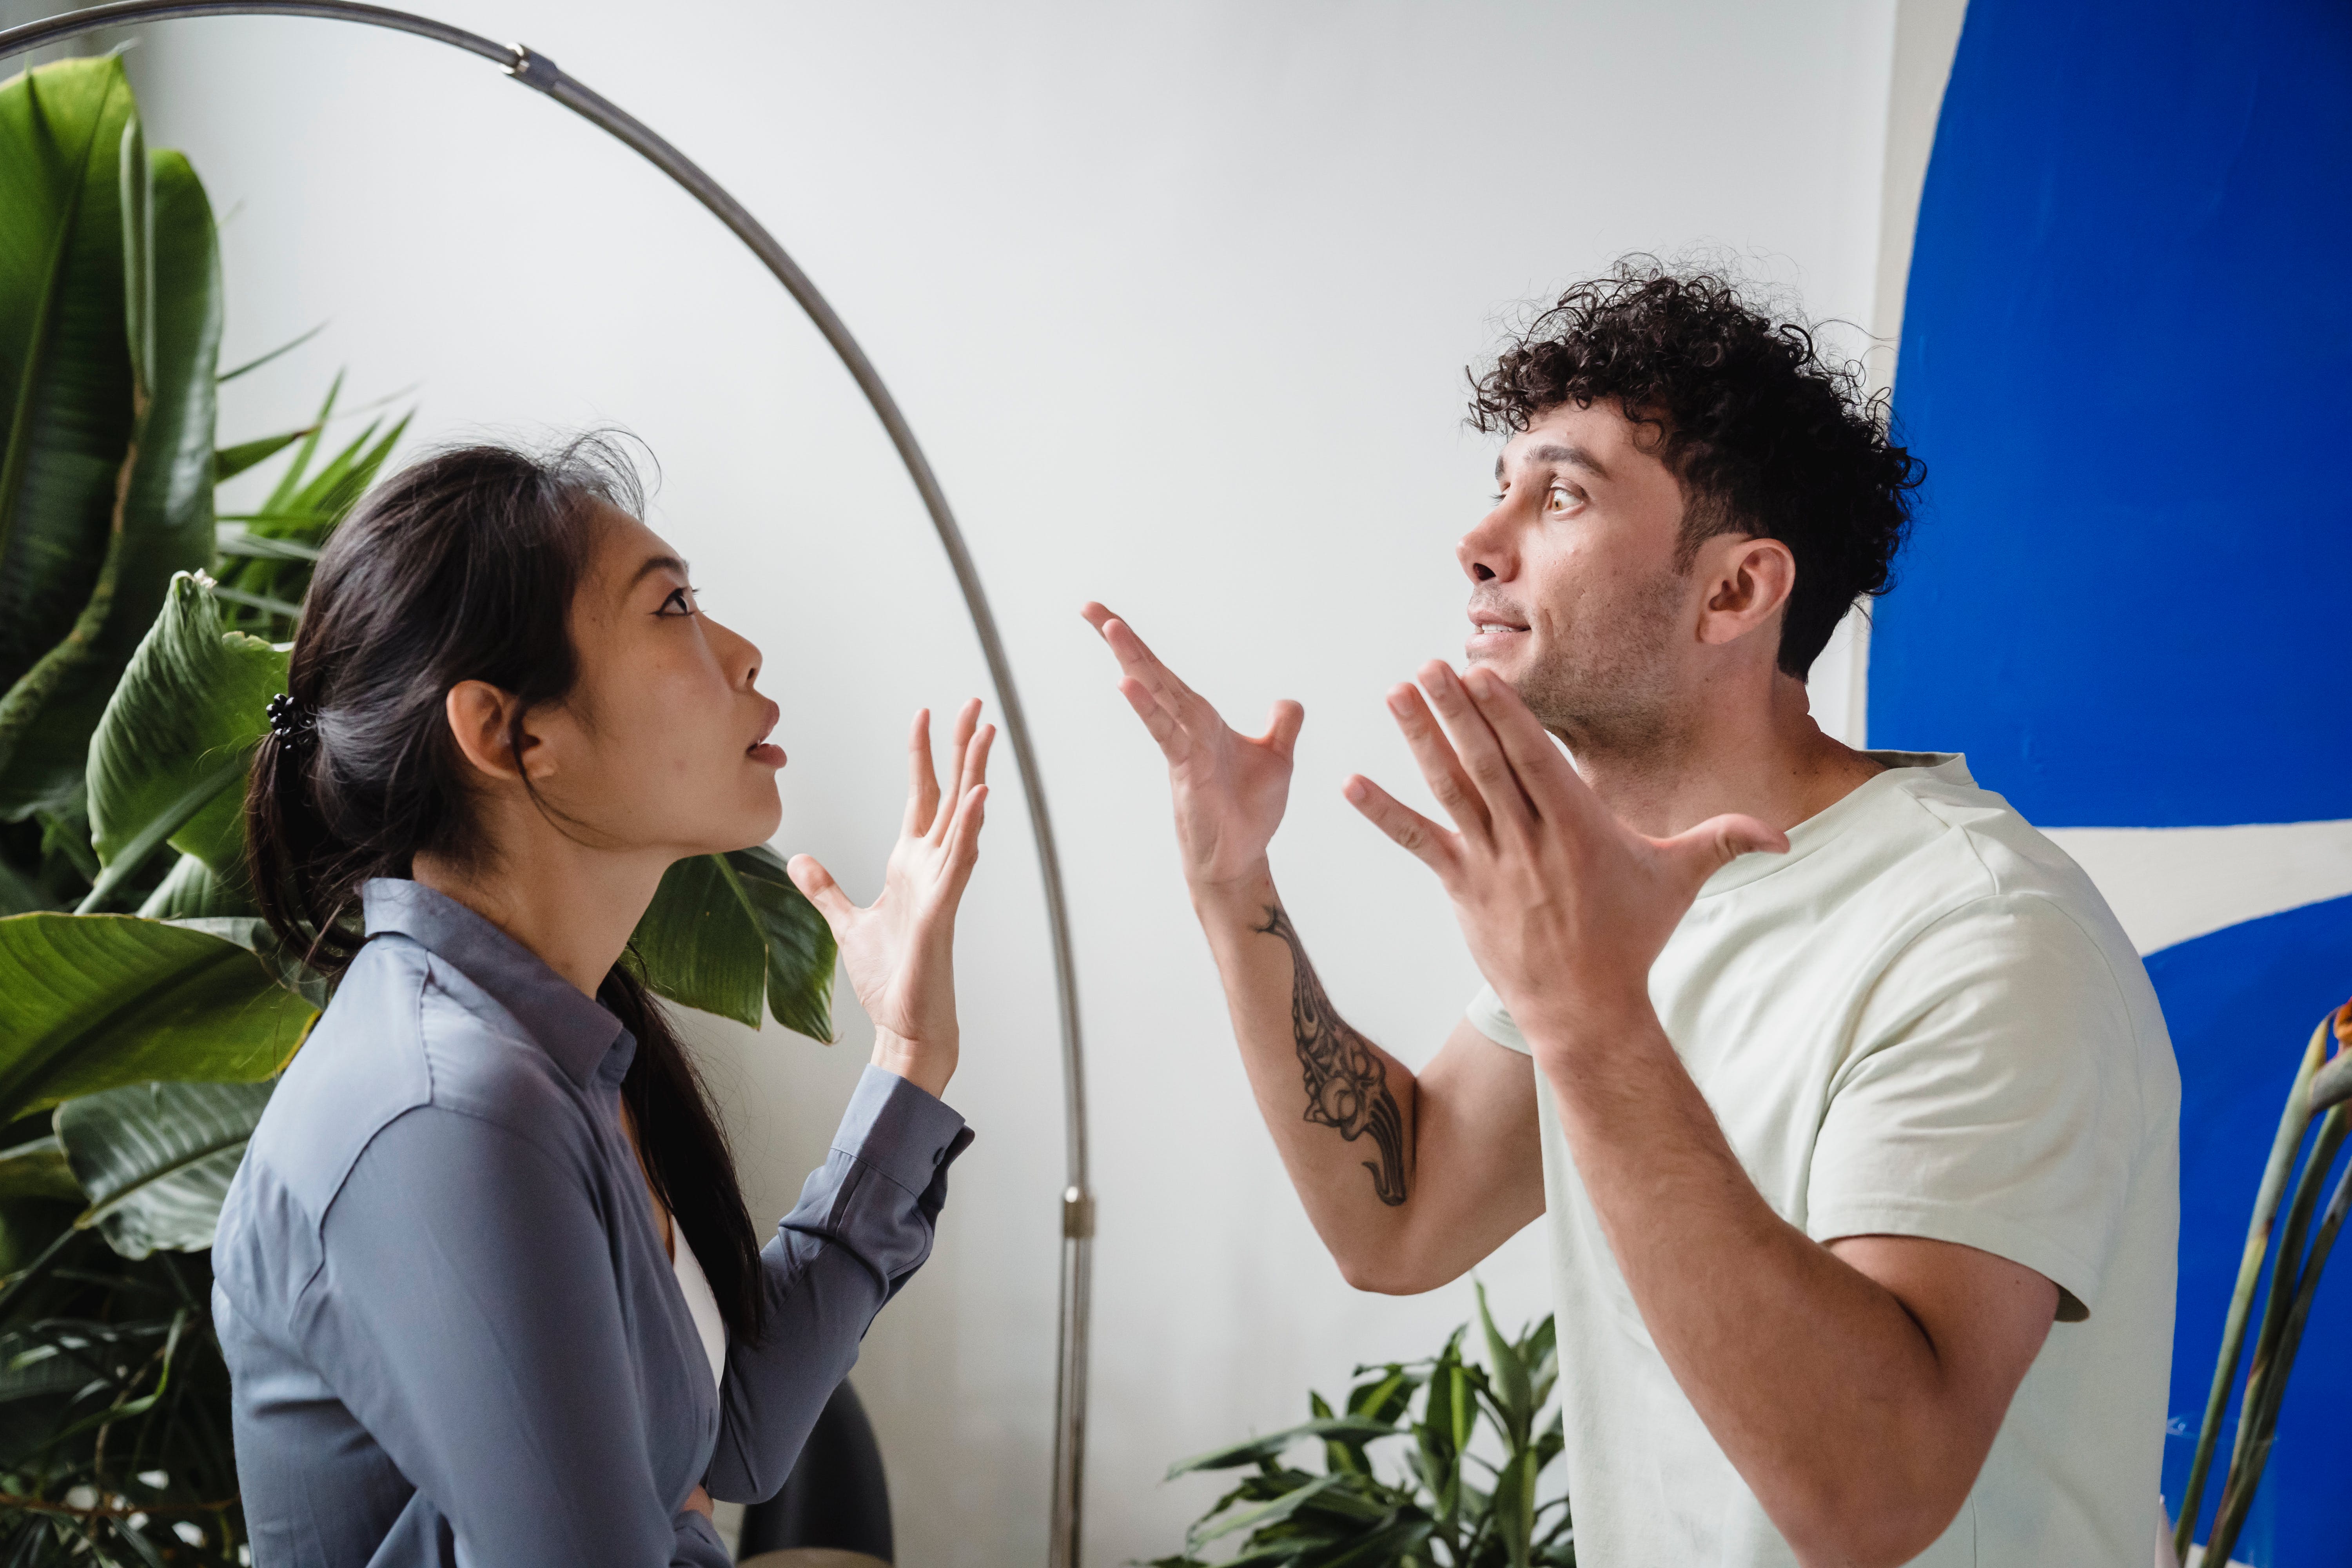 A couple having an argument at home | Source: Pexels